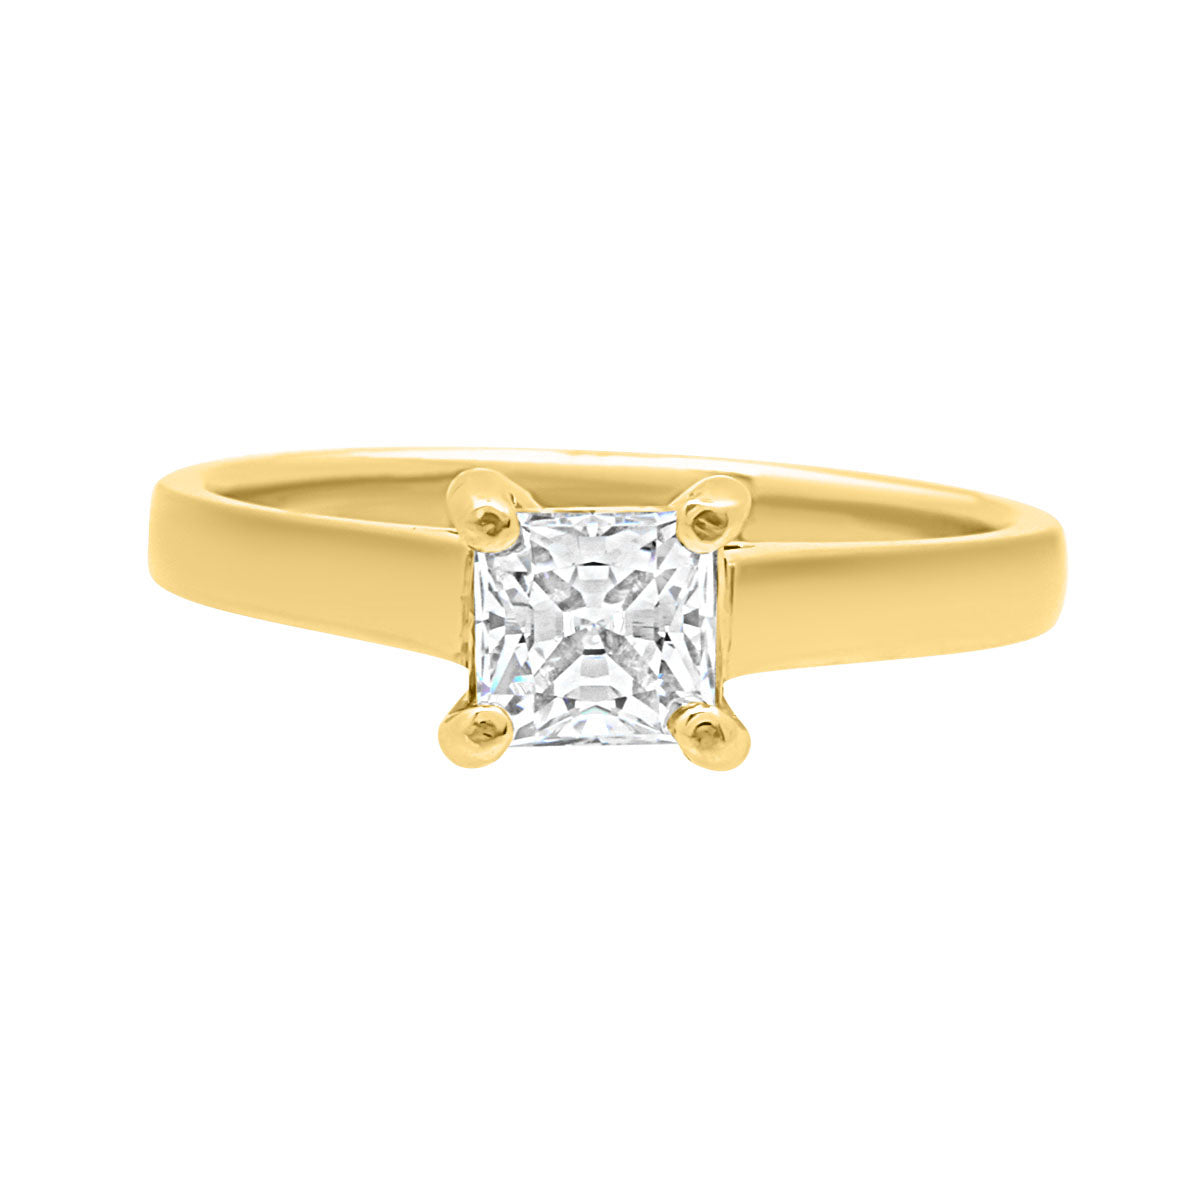 Princess cut engagement ring in yellow gold